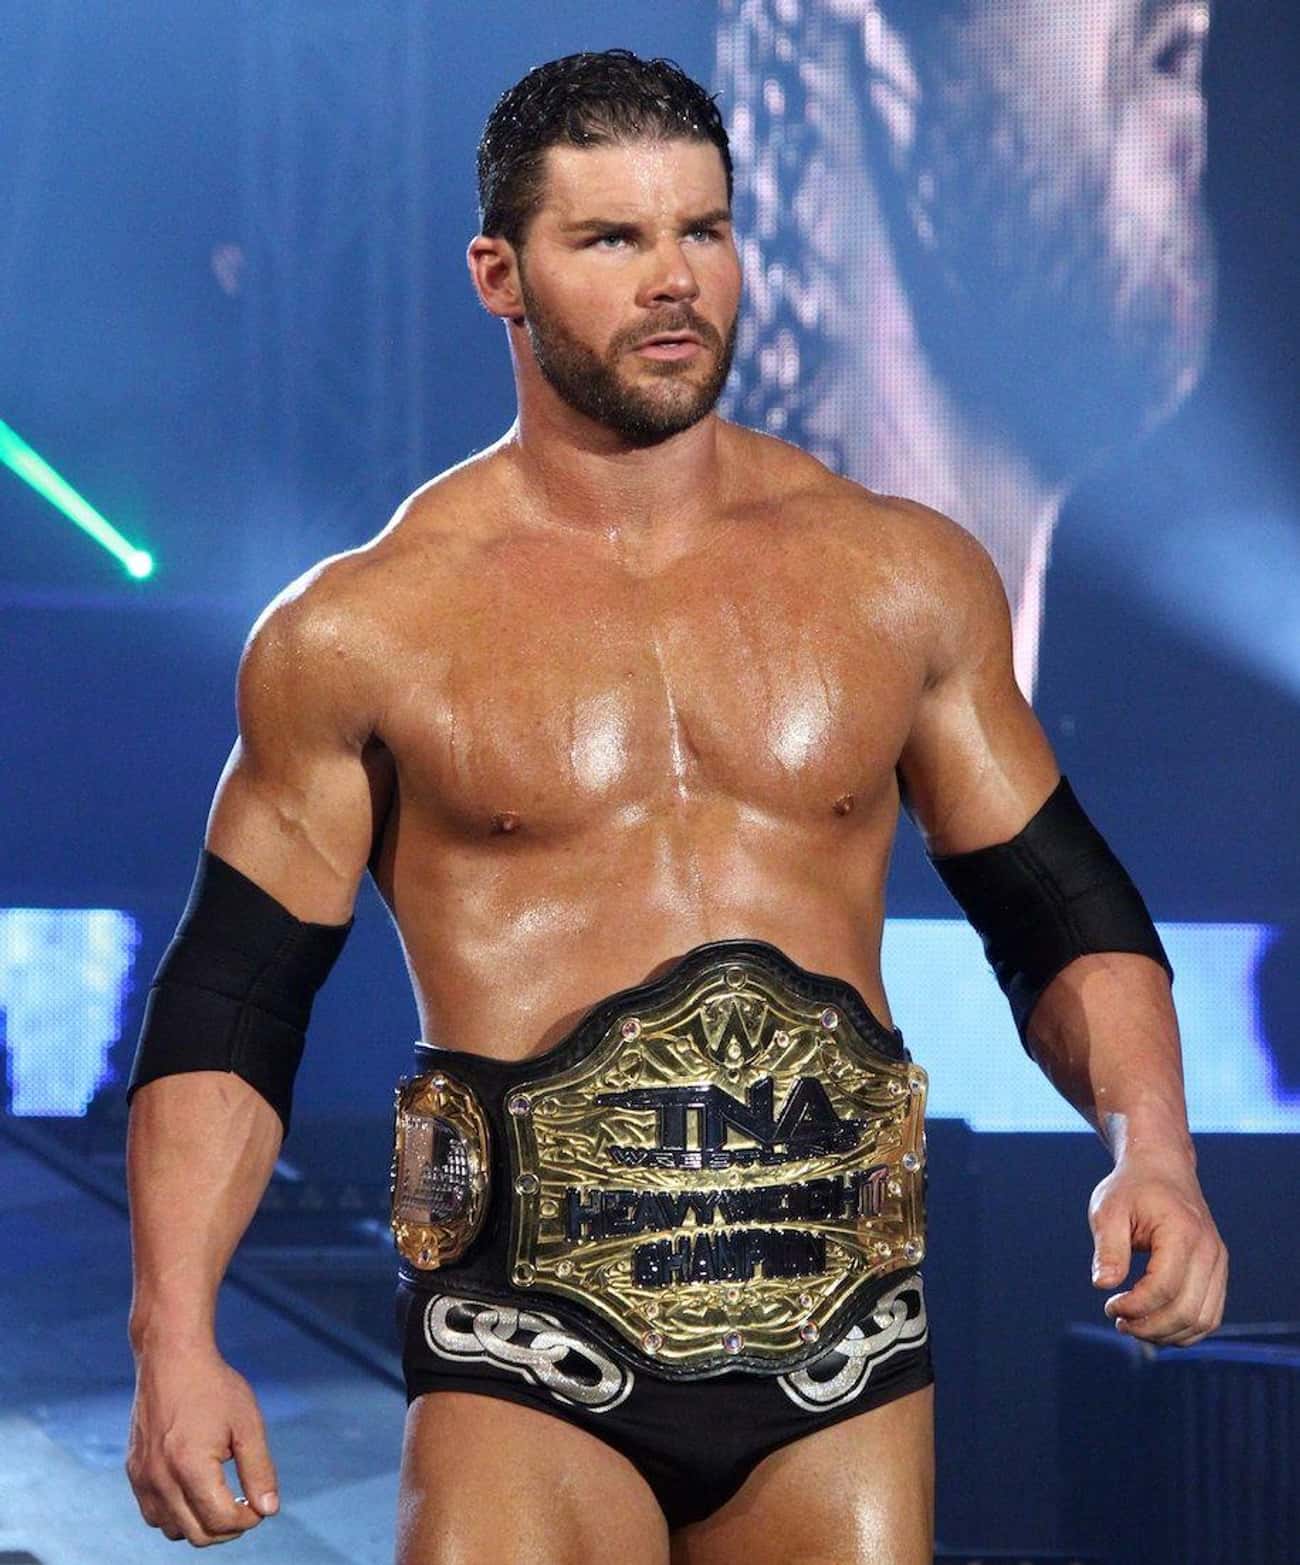 He's the Longest Reigning TNA World Champion